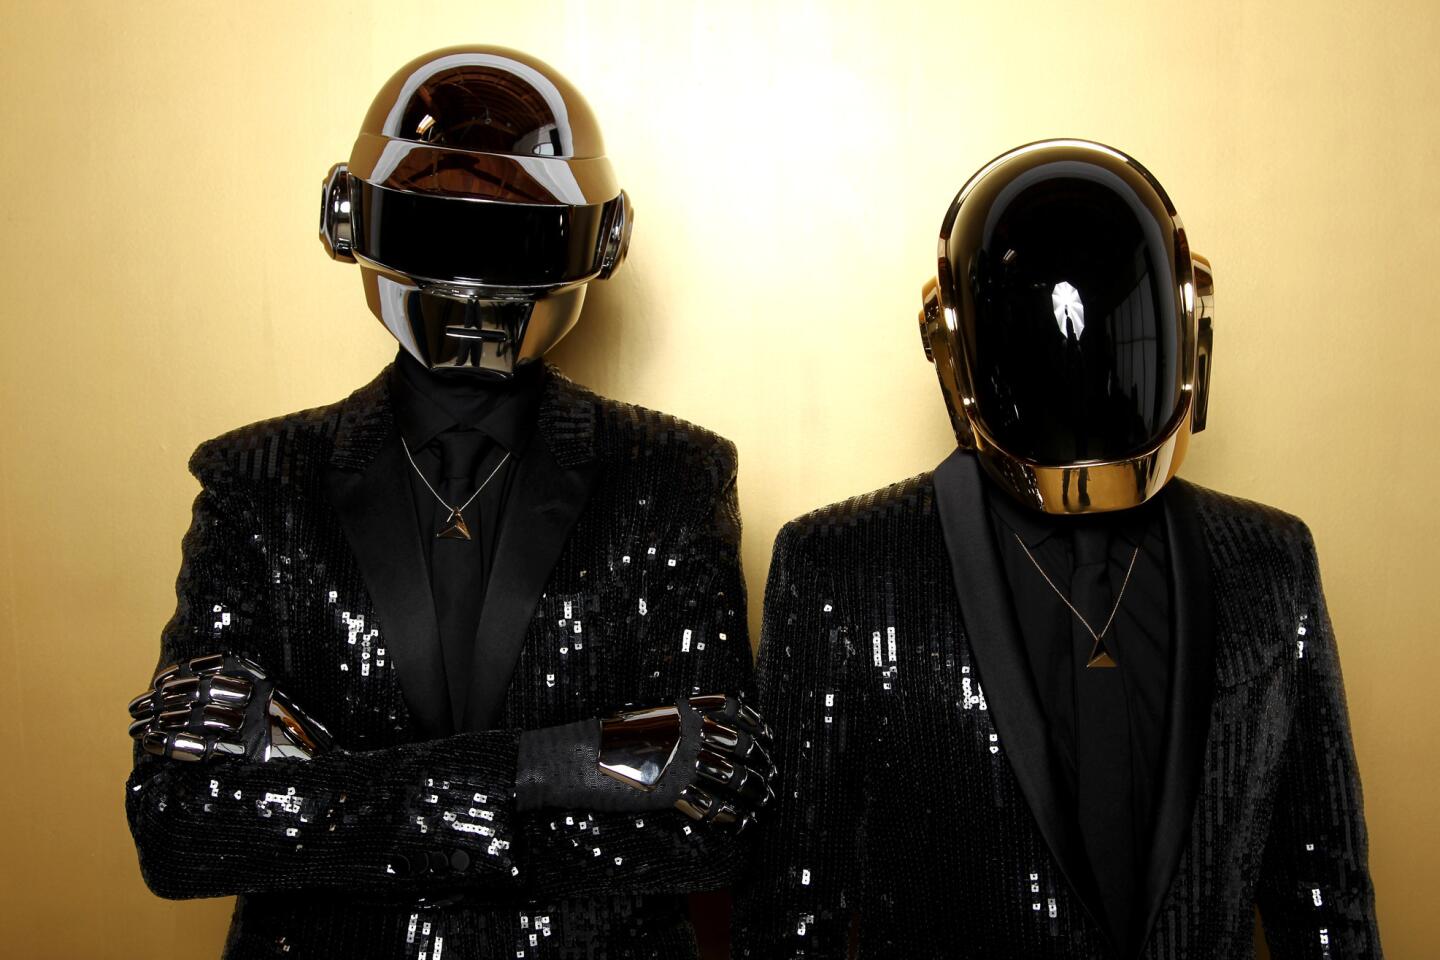 This is what Daft Punk was listening to 20 years ago: Listen